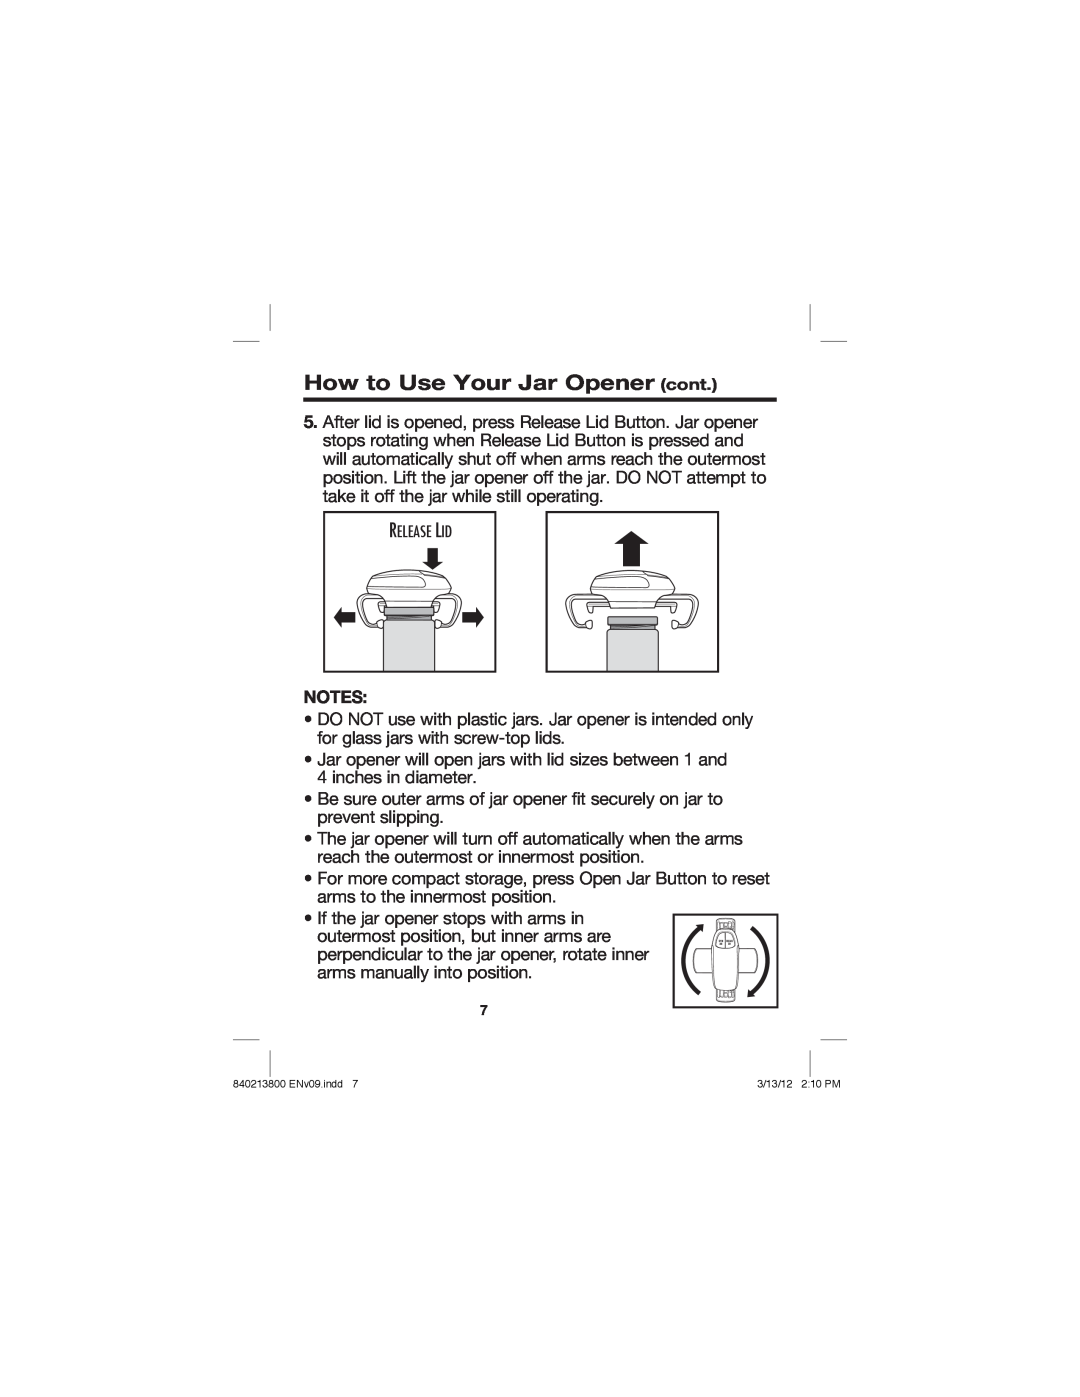 Hamilton Beach 840213800 manual How to Use Your Jar Opener cont, Release Lid 